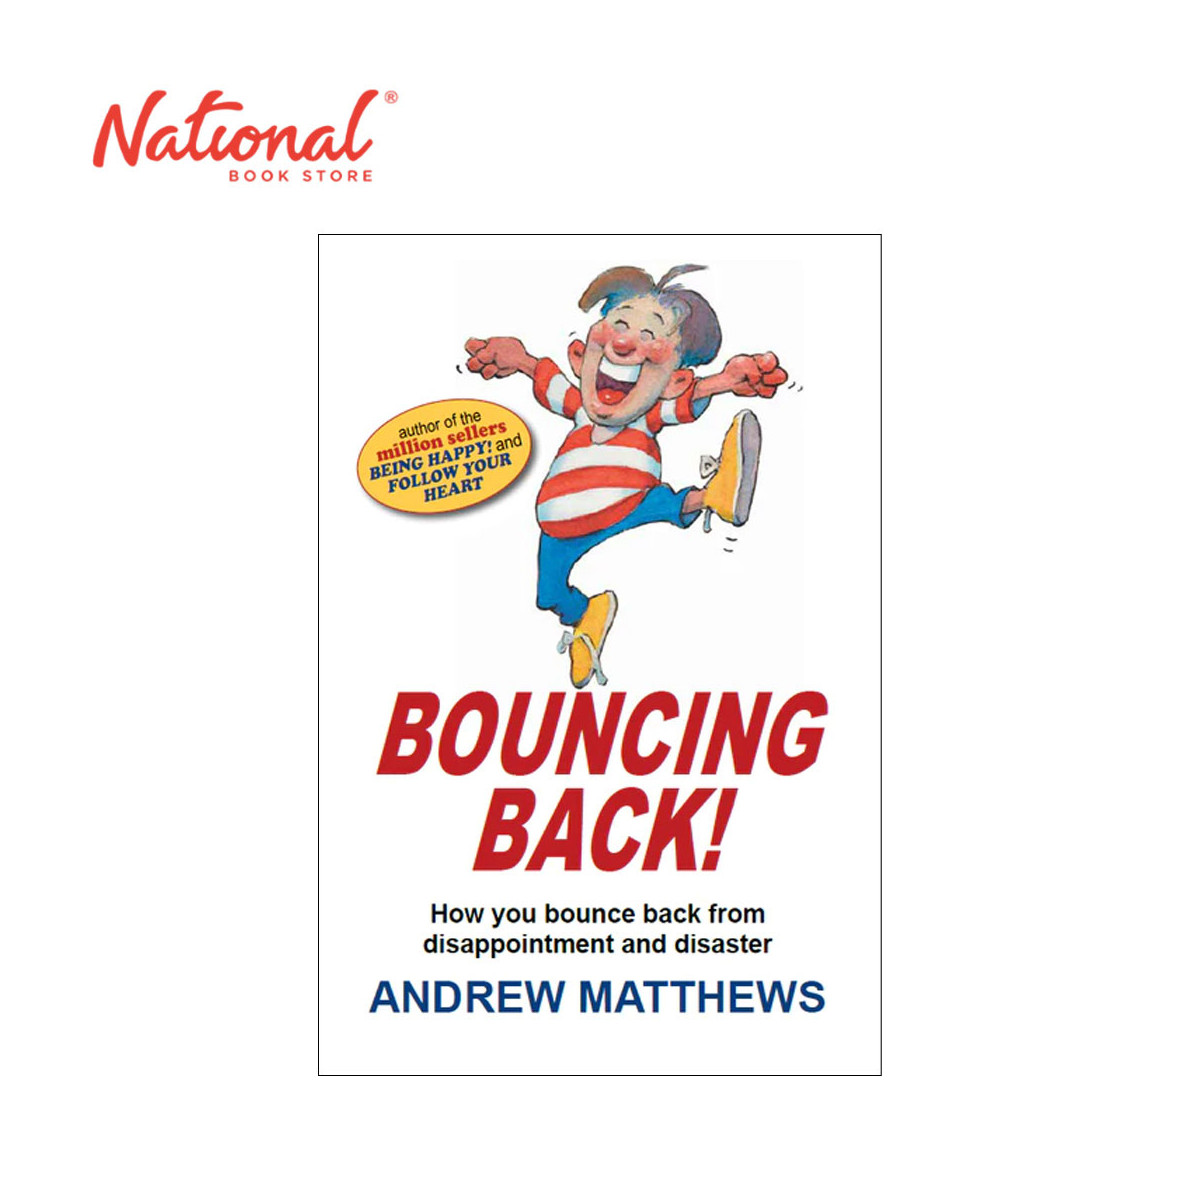 Bouncing Back! by Andrew Matthews Trade Paperback - Psychology & Self-Help